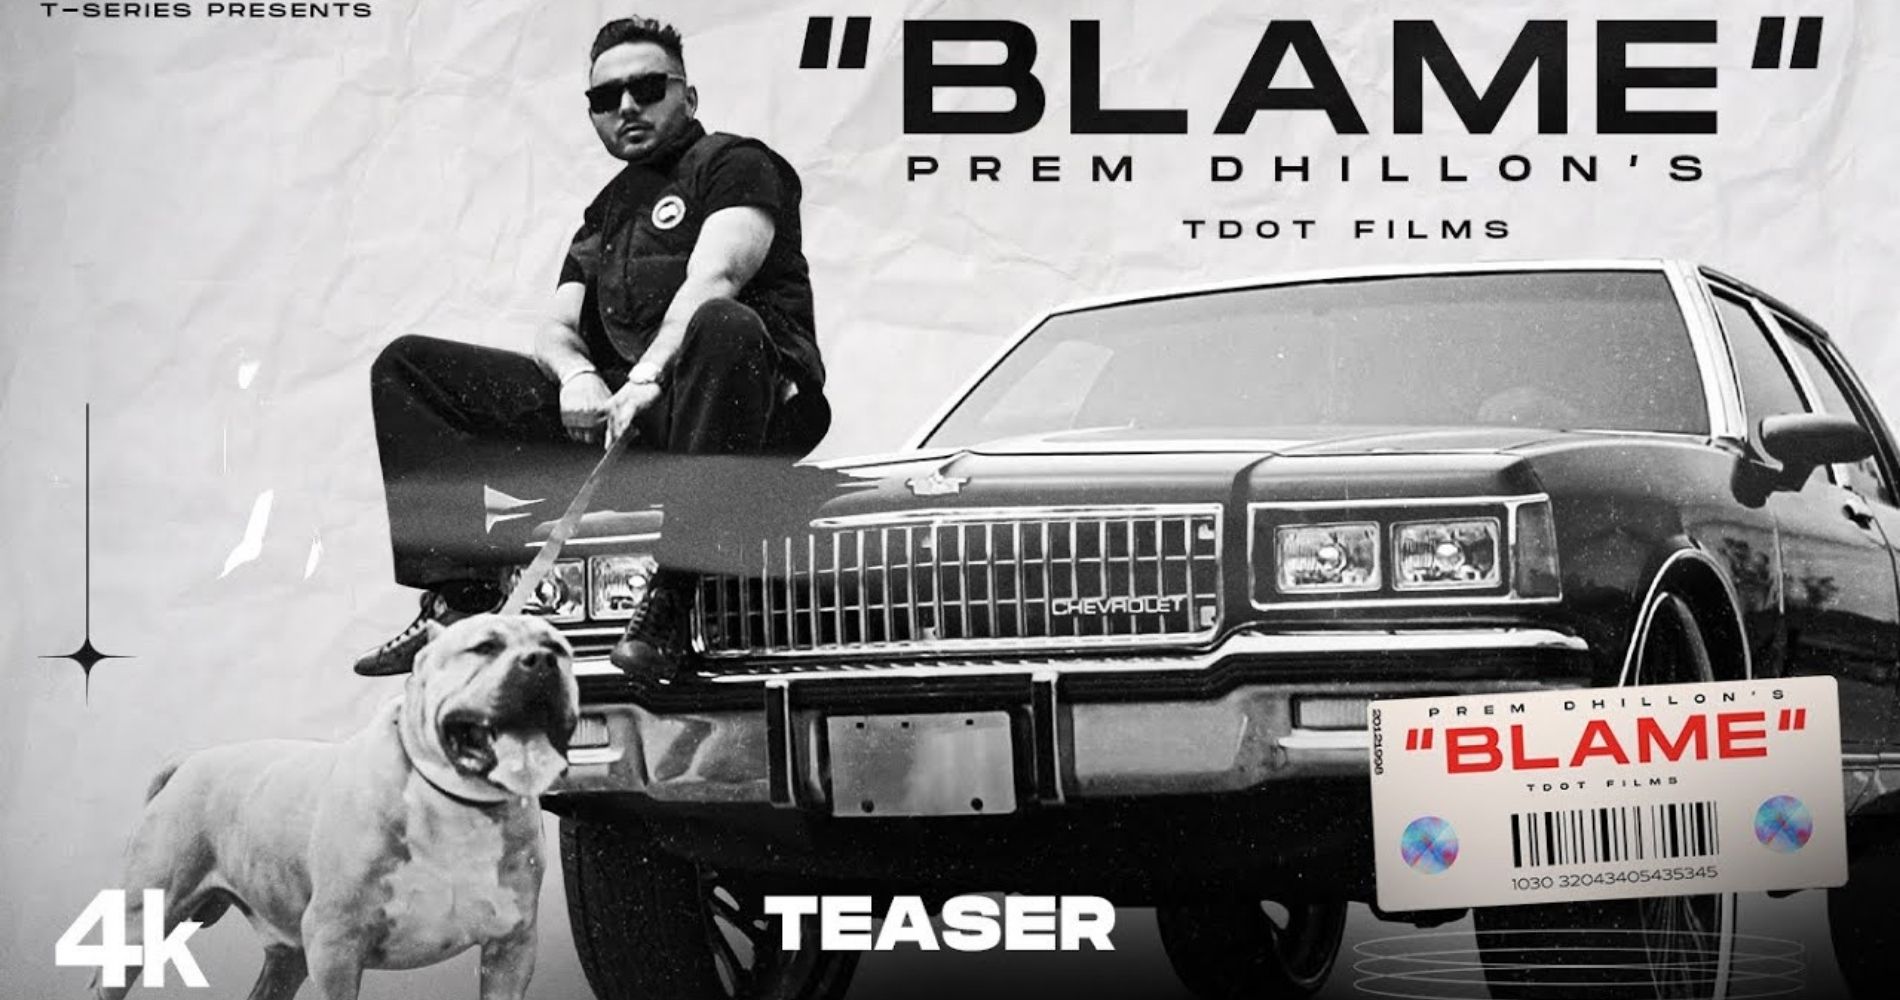 Prem Dhillon is out with his latest track ‘Blame’ produced